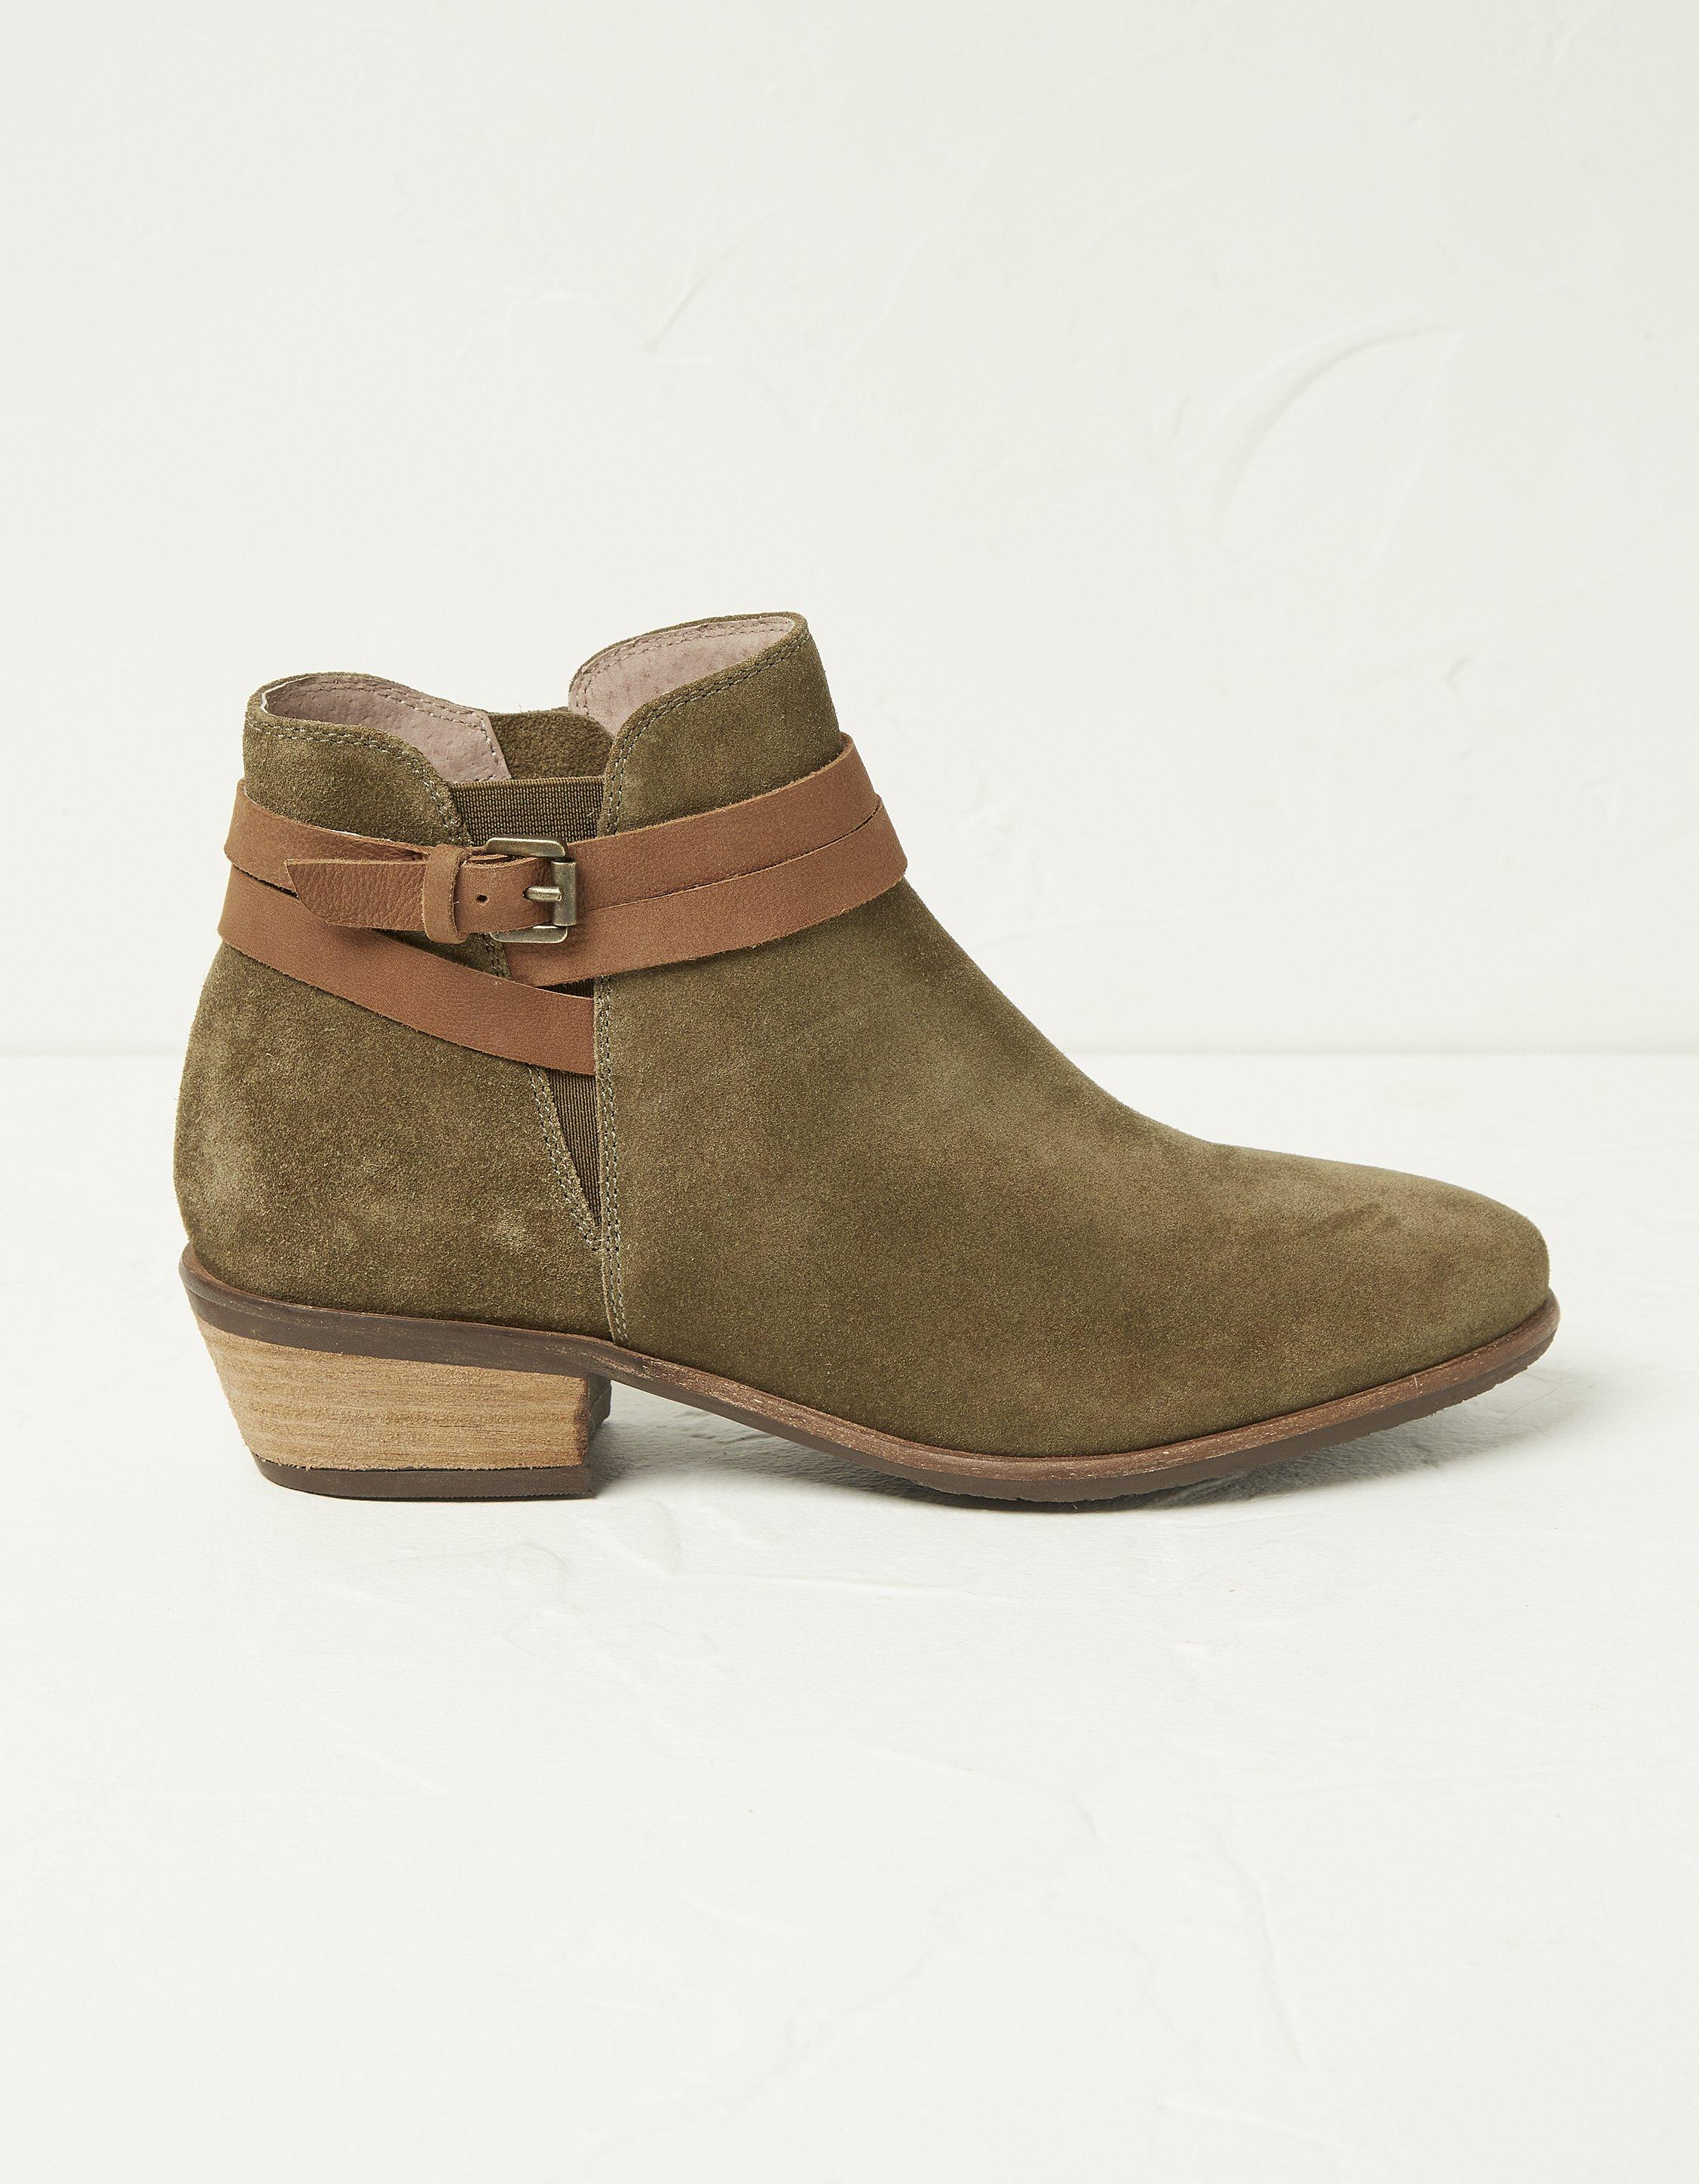 Ava Ankle Strap Boots, Boots | FatFace.com